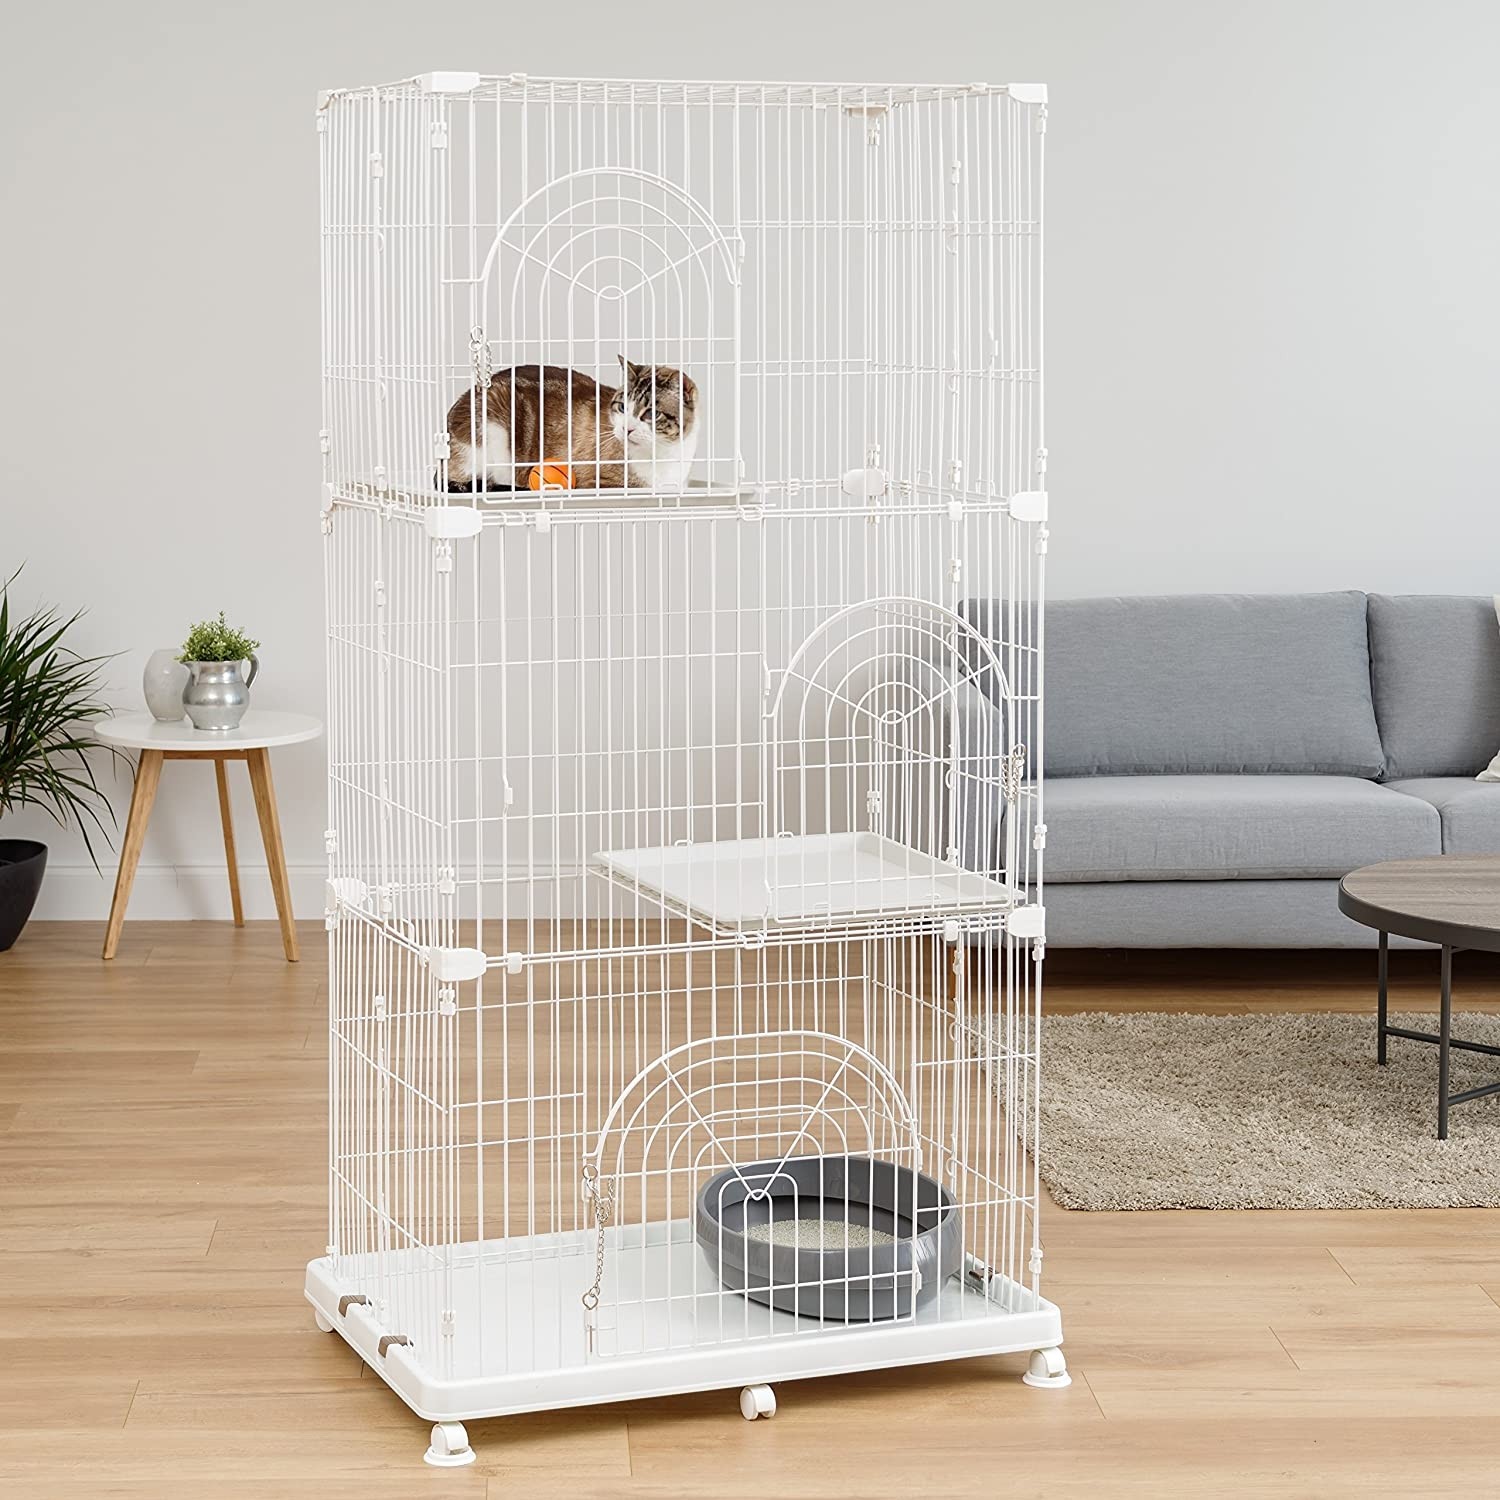 The 4 best cat cages for indoors crates playpens 3